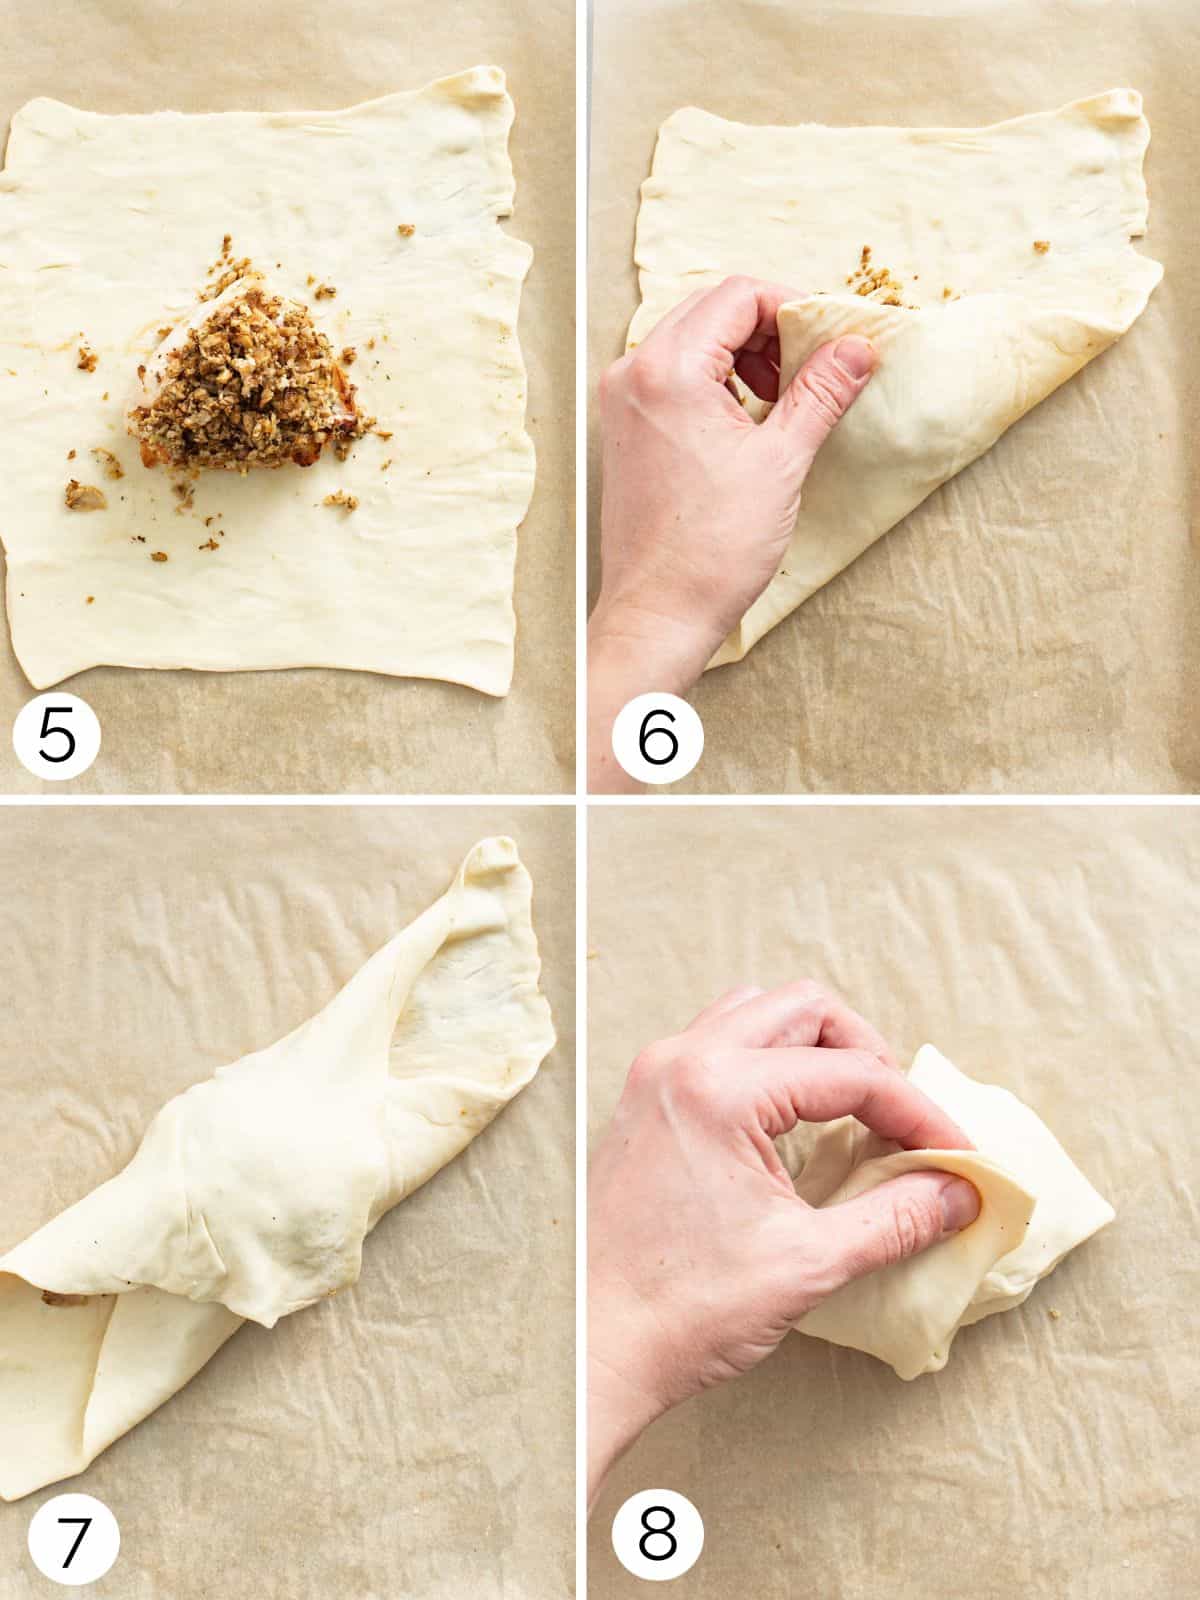 Process photos showing how to wrap the chicken and mushrooms in the puff pastry, twisting the top to secure the pocket.